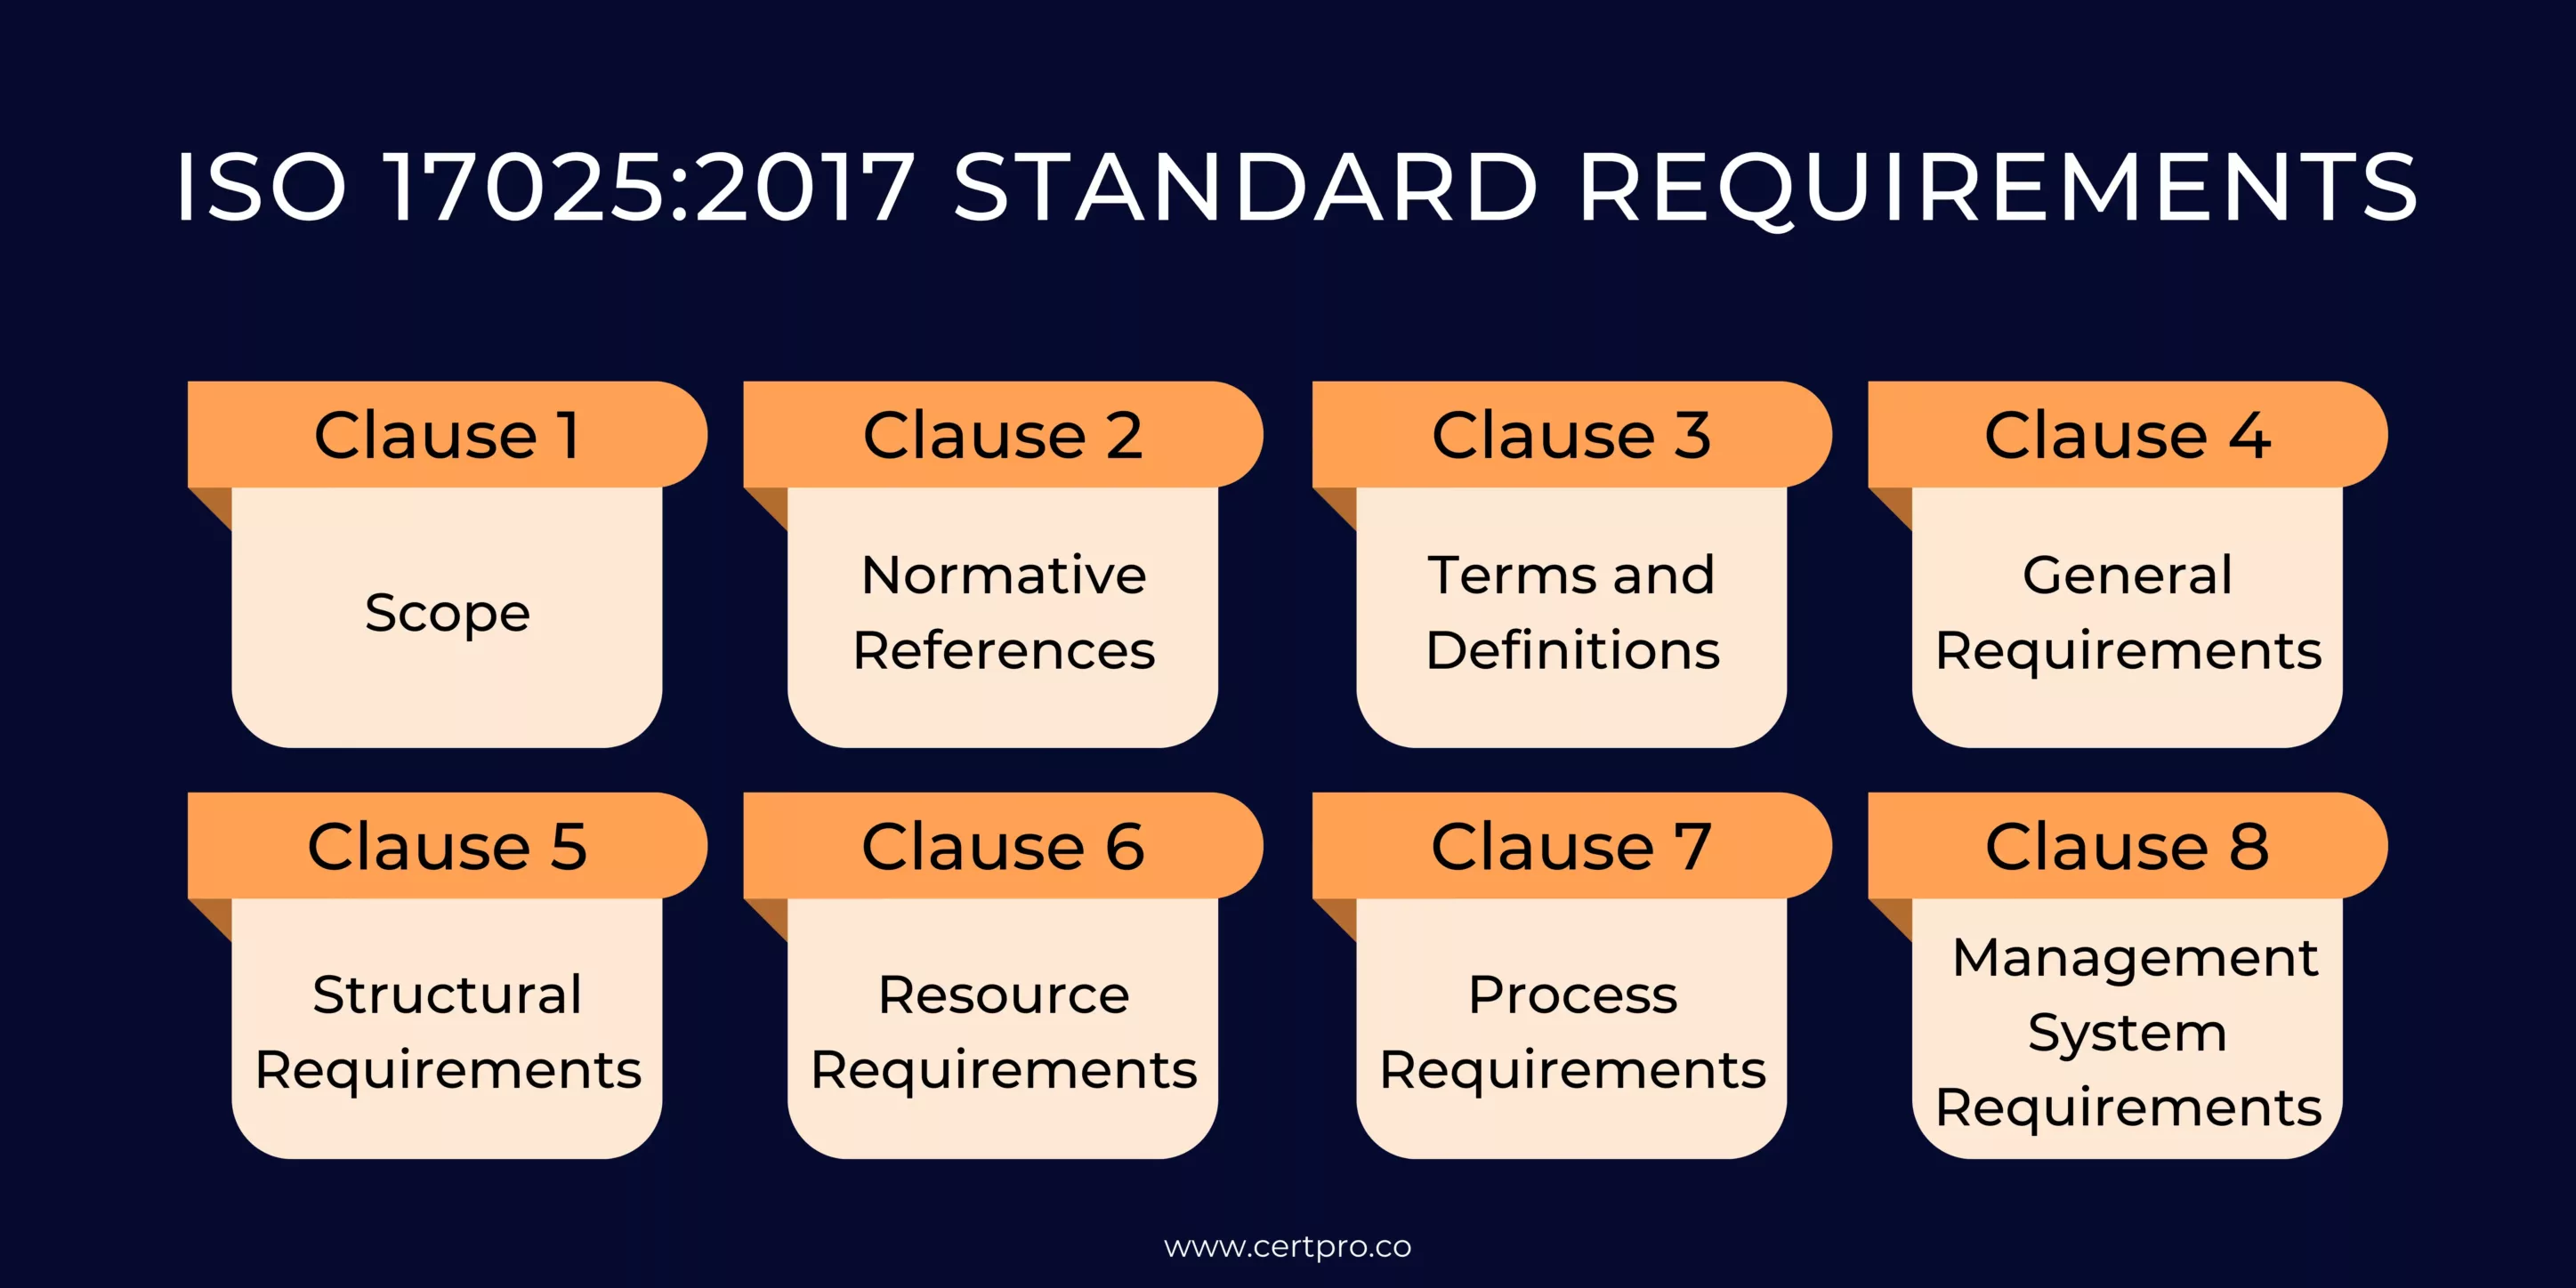 ISO 17025 STANDARD REQUIREMENTS